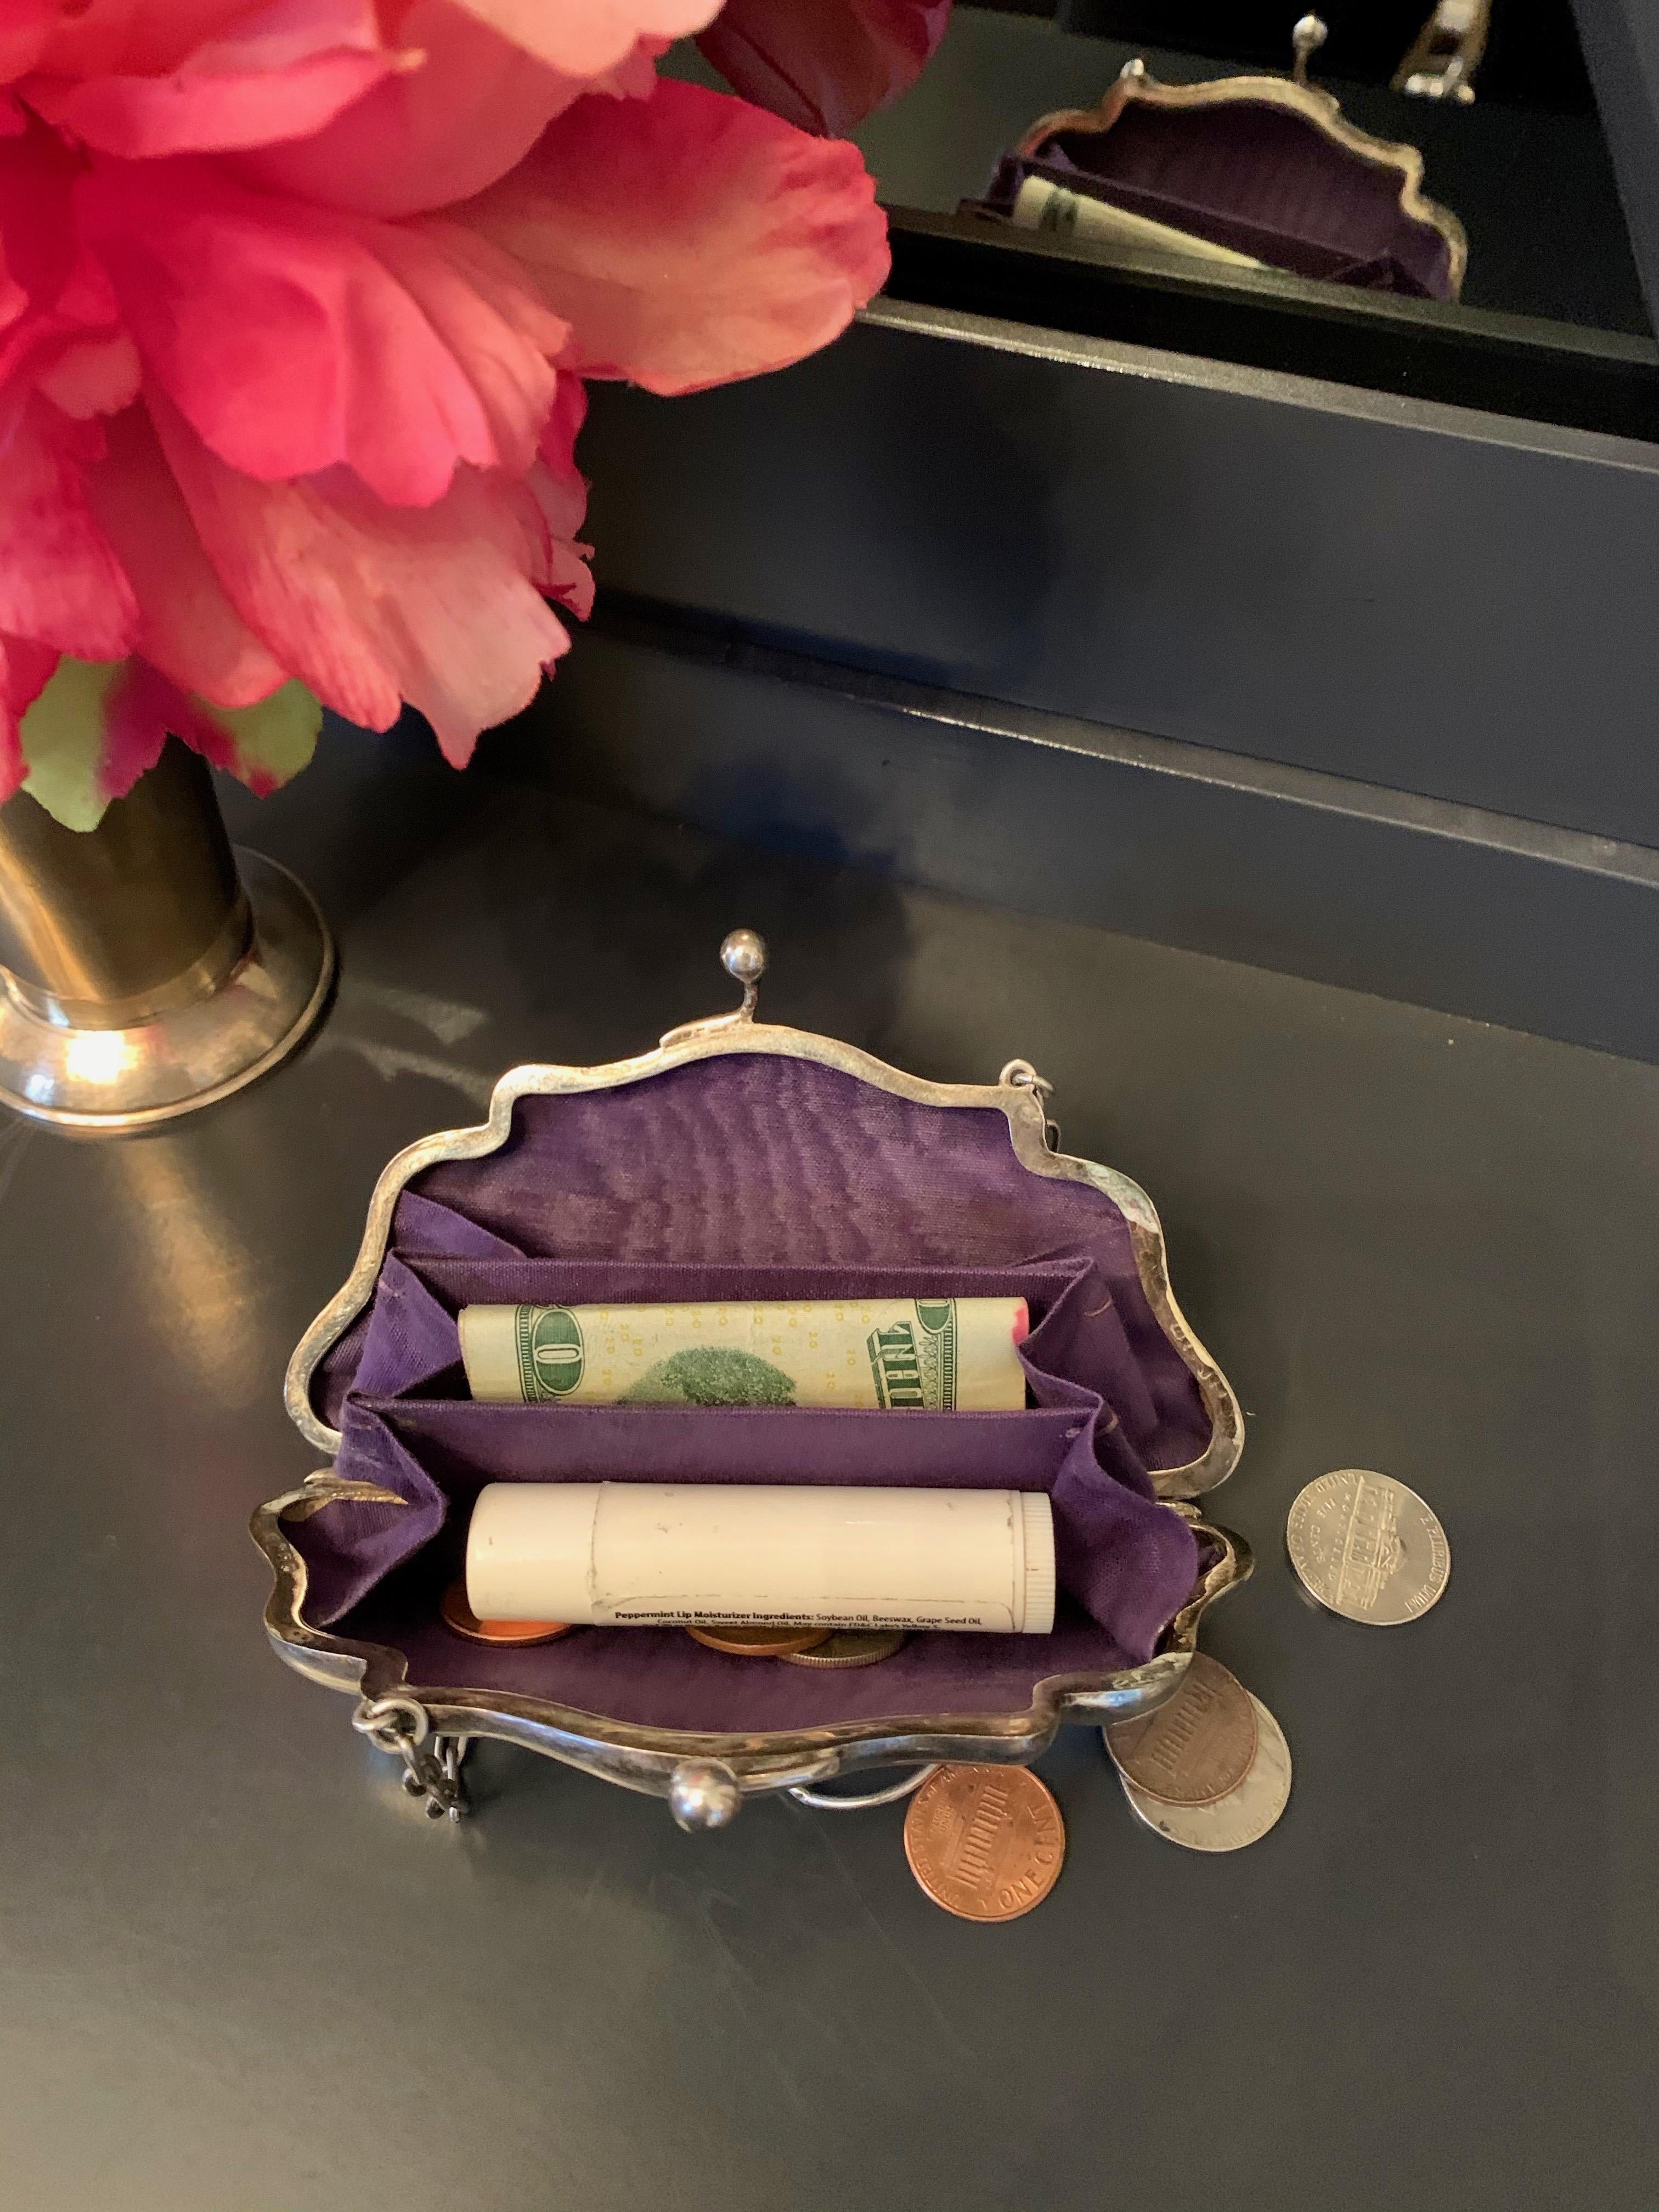 Silver plate coin purse with three sections for change, money, lipstick, etc. perfect for the man or woman that enjoys carrying a small but efficient piece.
Chain handle or clutch

Aubergine satin lining in very good condition.